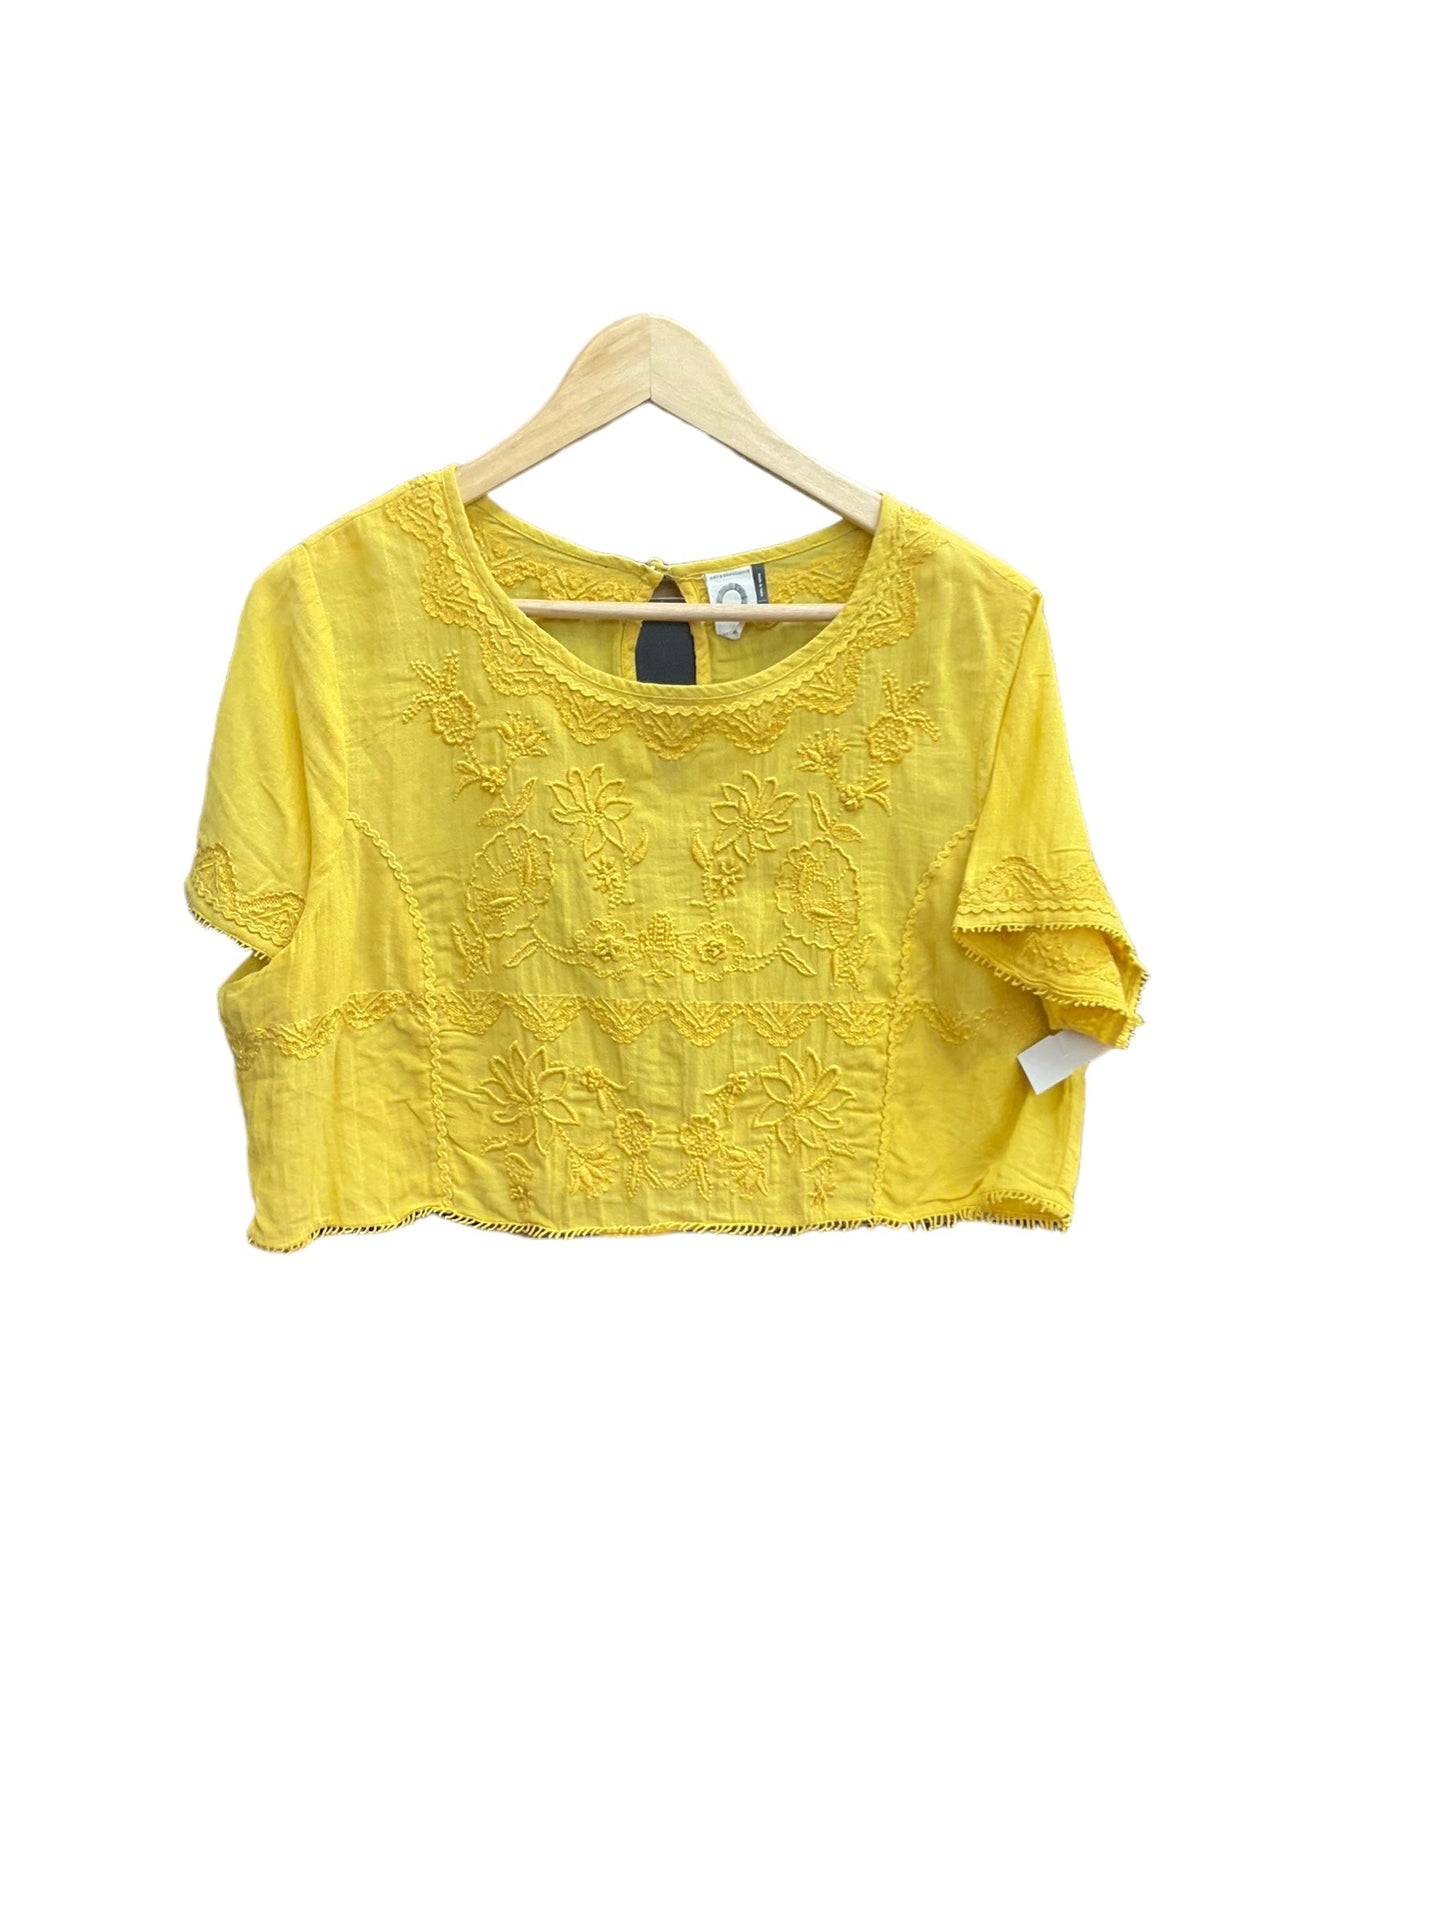 Yellow Top Short Sleeve Anthropologie, Size Xl